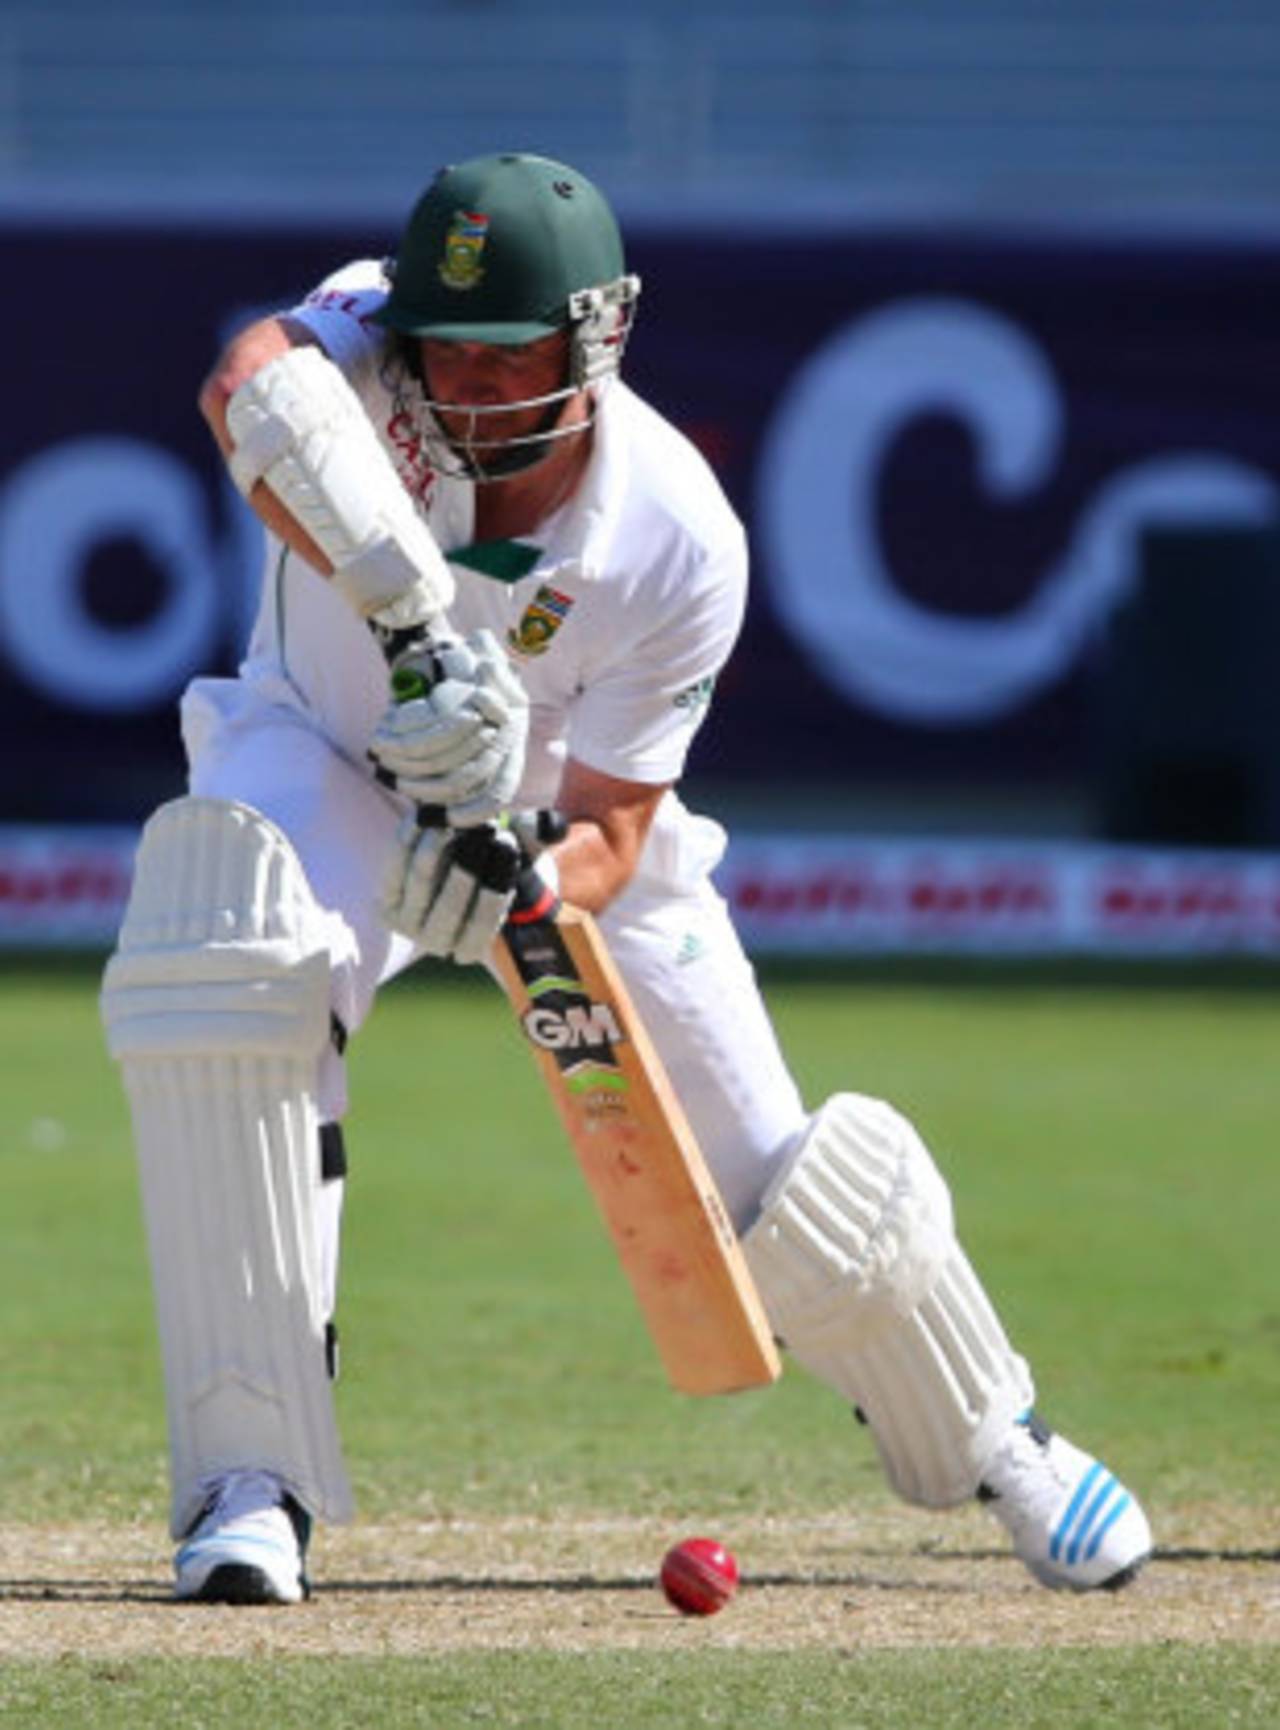 Graeme Smith took South Africa into the lead, Pakistan v South Africa, 2nd Test, 1st day, Dubai, October 23, 2013